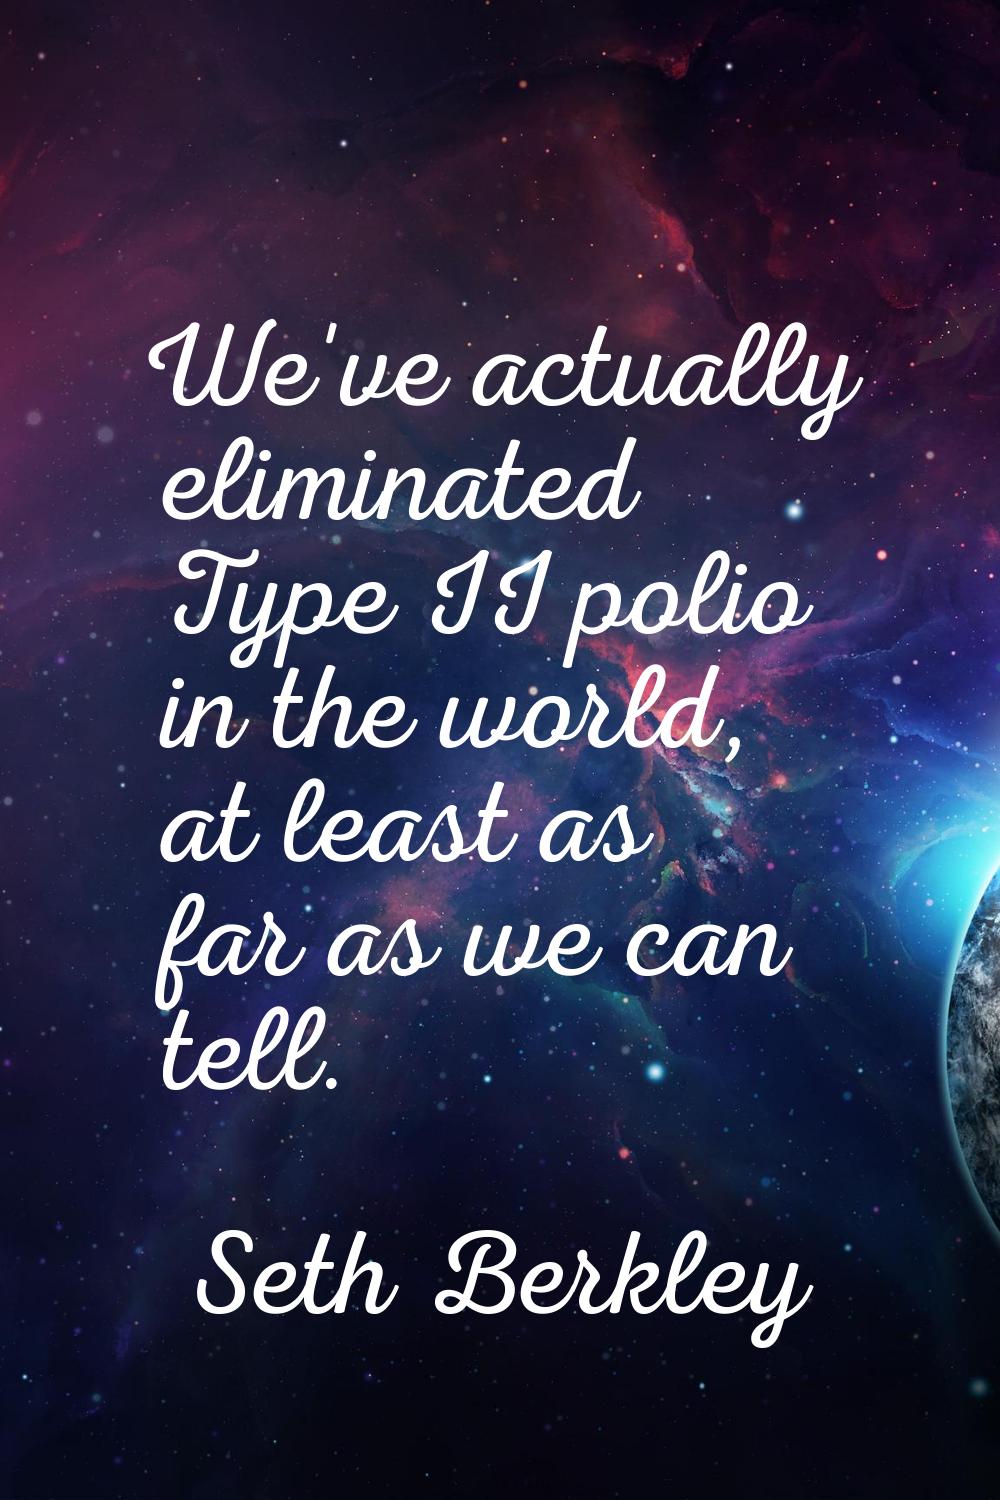 We've actually eliminated Type II polio in the world, at least as far as we can tell.